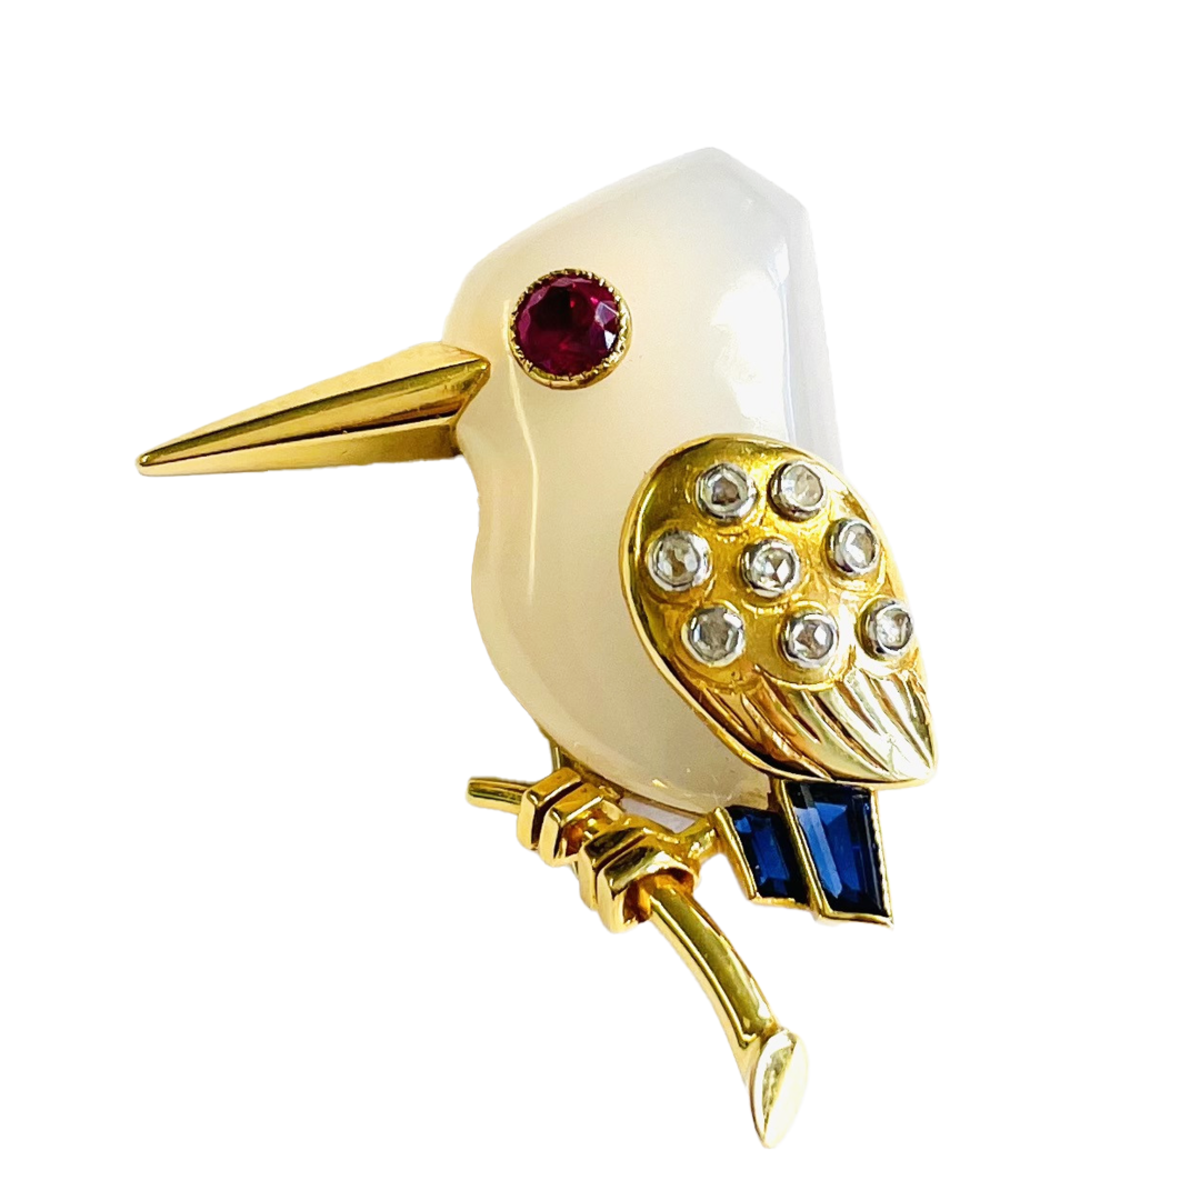 Cartier 1950s 18KT Yellow Gold Agate, Diamond, Ruby & Sapphire Kingfisher Bird Brooch front view